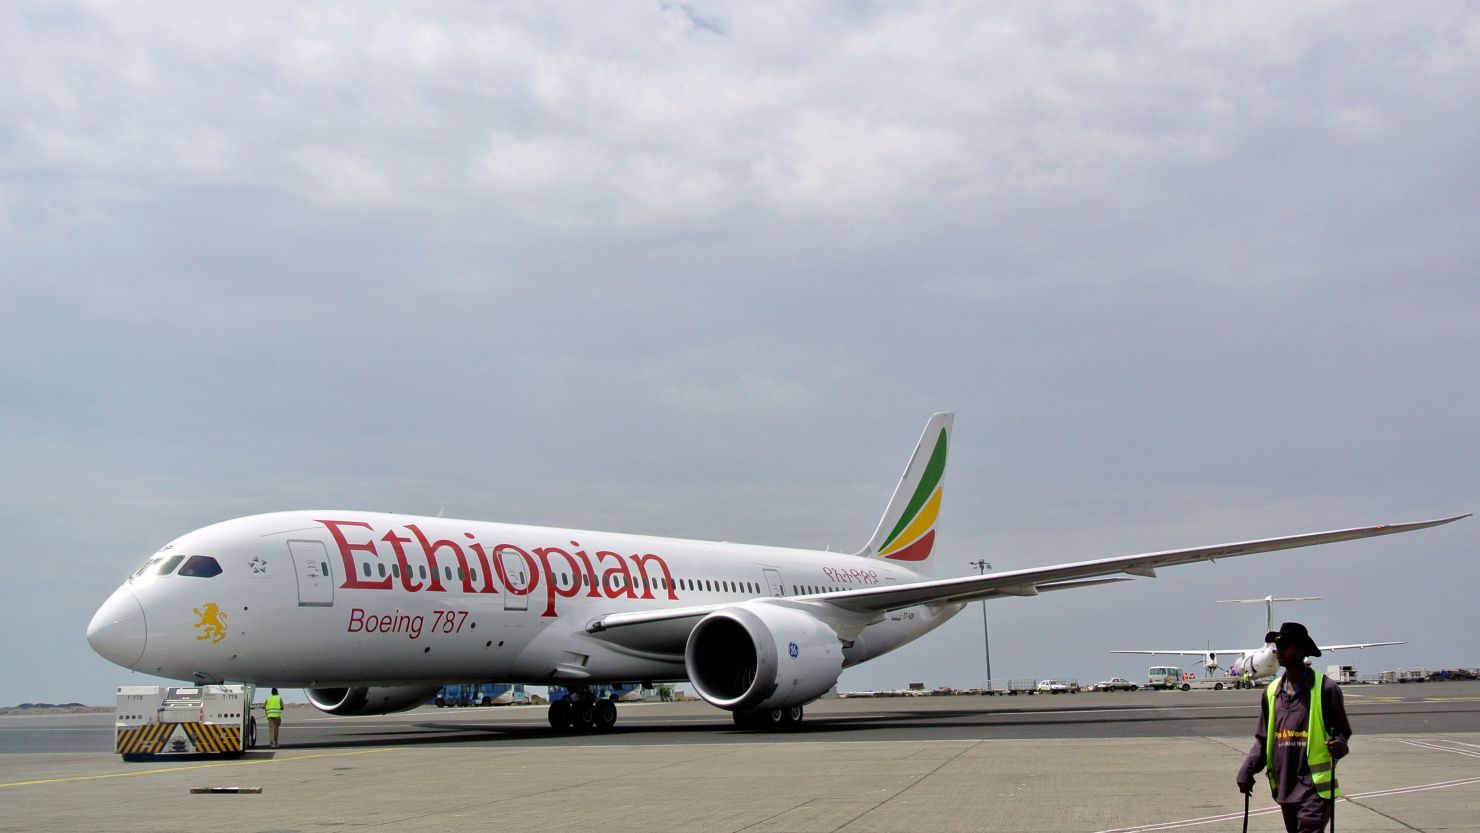 Ethiopian Airlines was the first airline to resume flying the Boeing 787 (pictured prior to an April takeoff) that were grounded worldwide earlier this year due to battery problems.